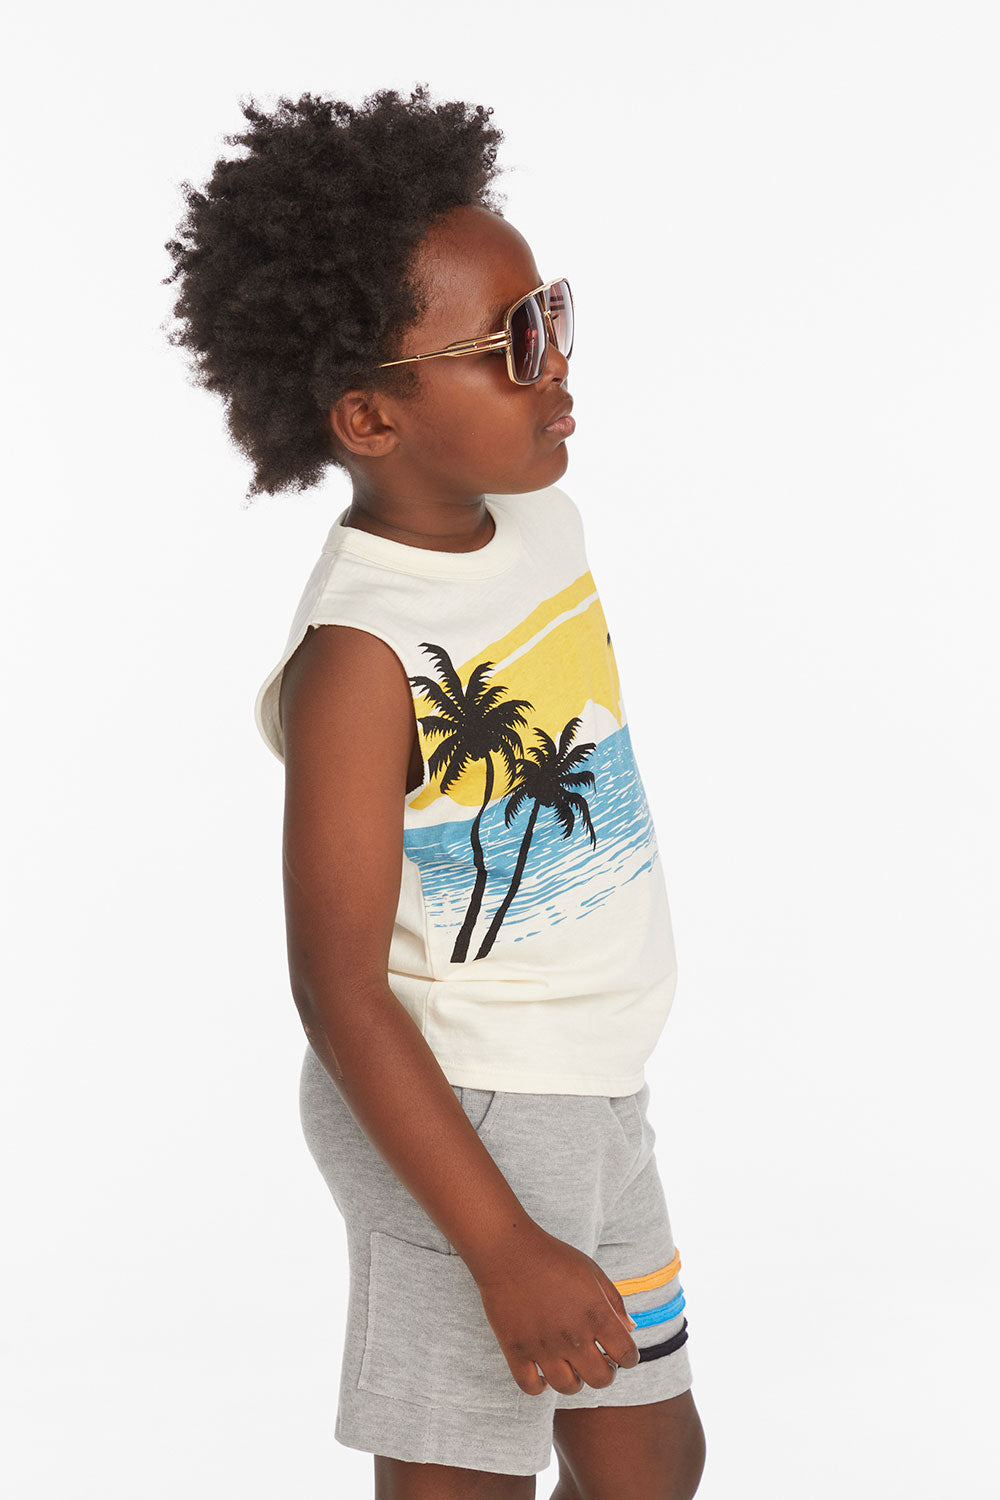 Ocean View Boys Muscle Tank Boys chaserbrand